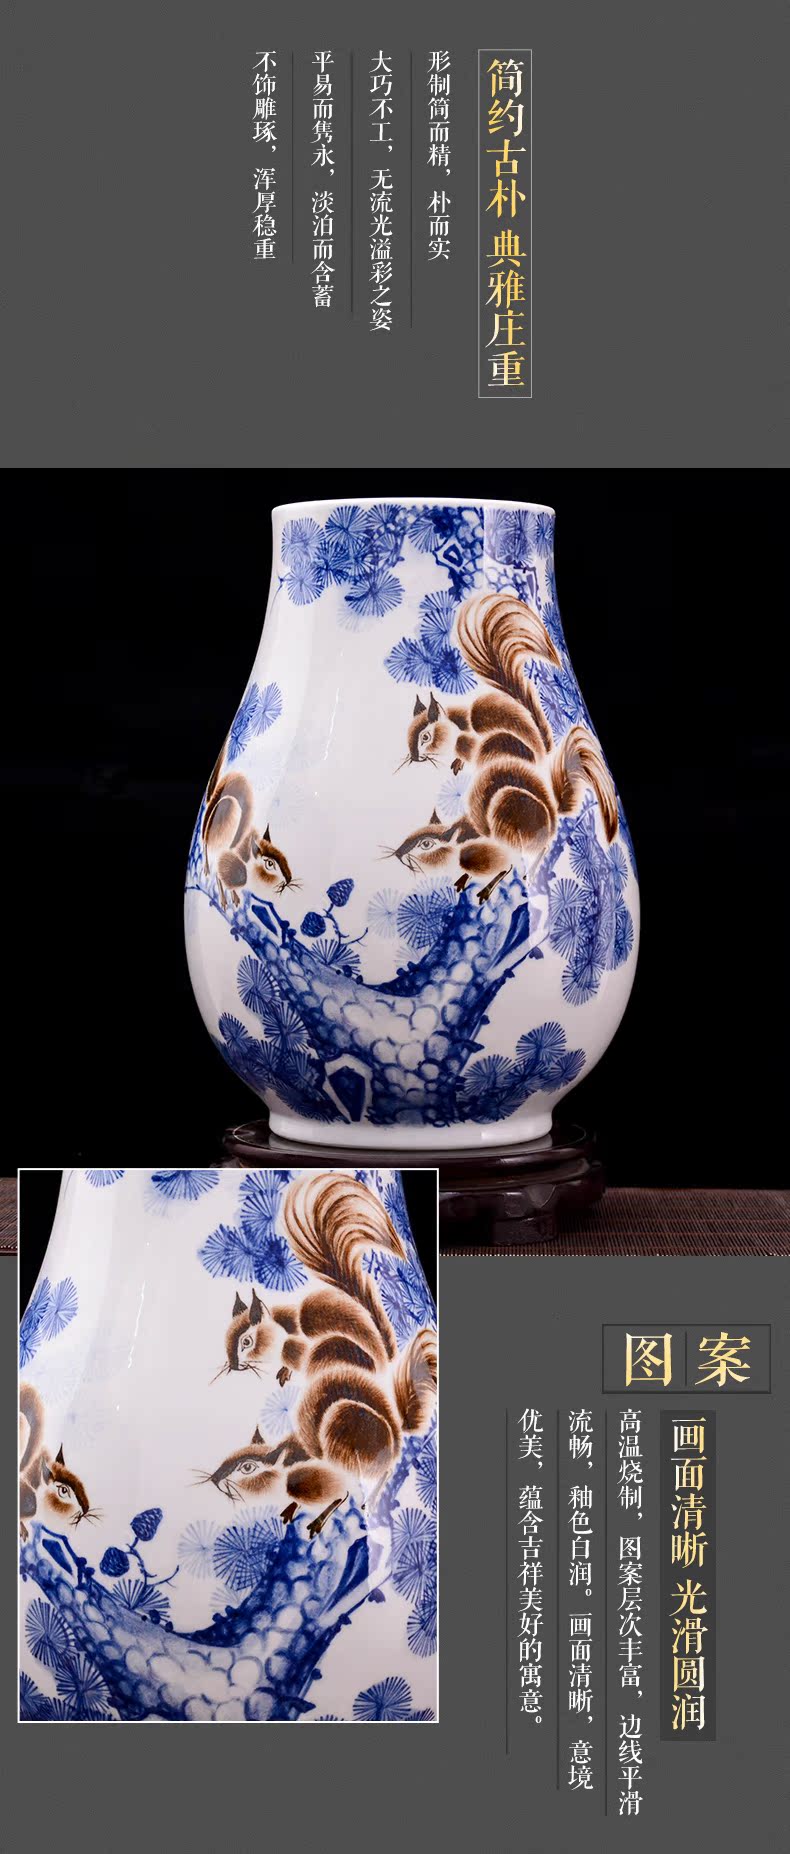 The Master of jingdezhen ceramic hand - made gold rat prosperous wealth vase household adornment flower arranging the sitting room porch handicraft furnishing articles